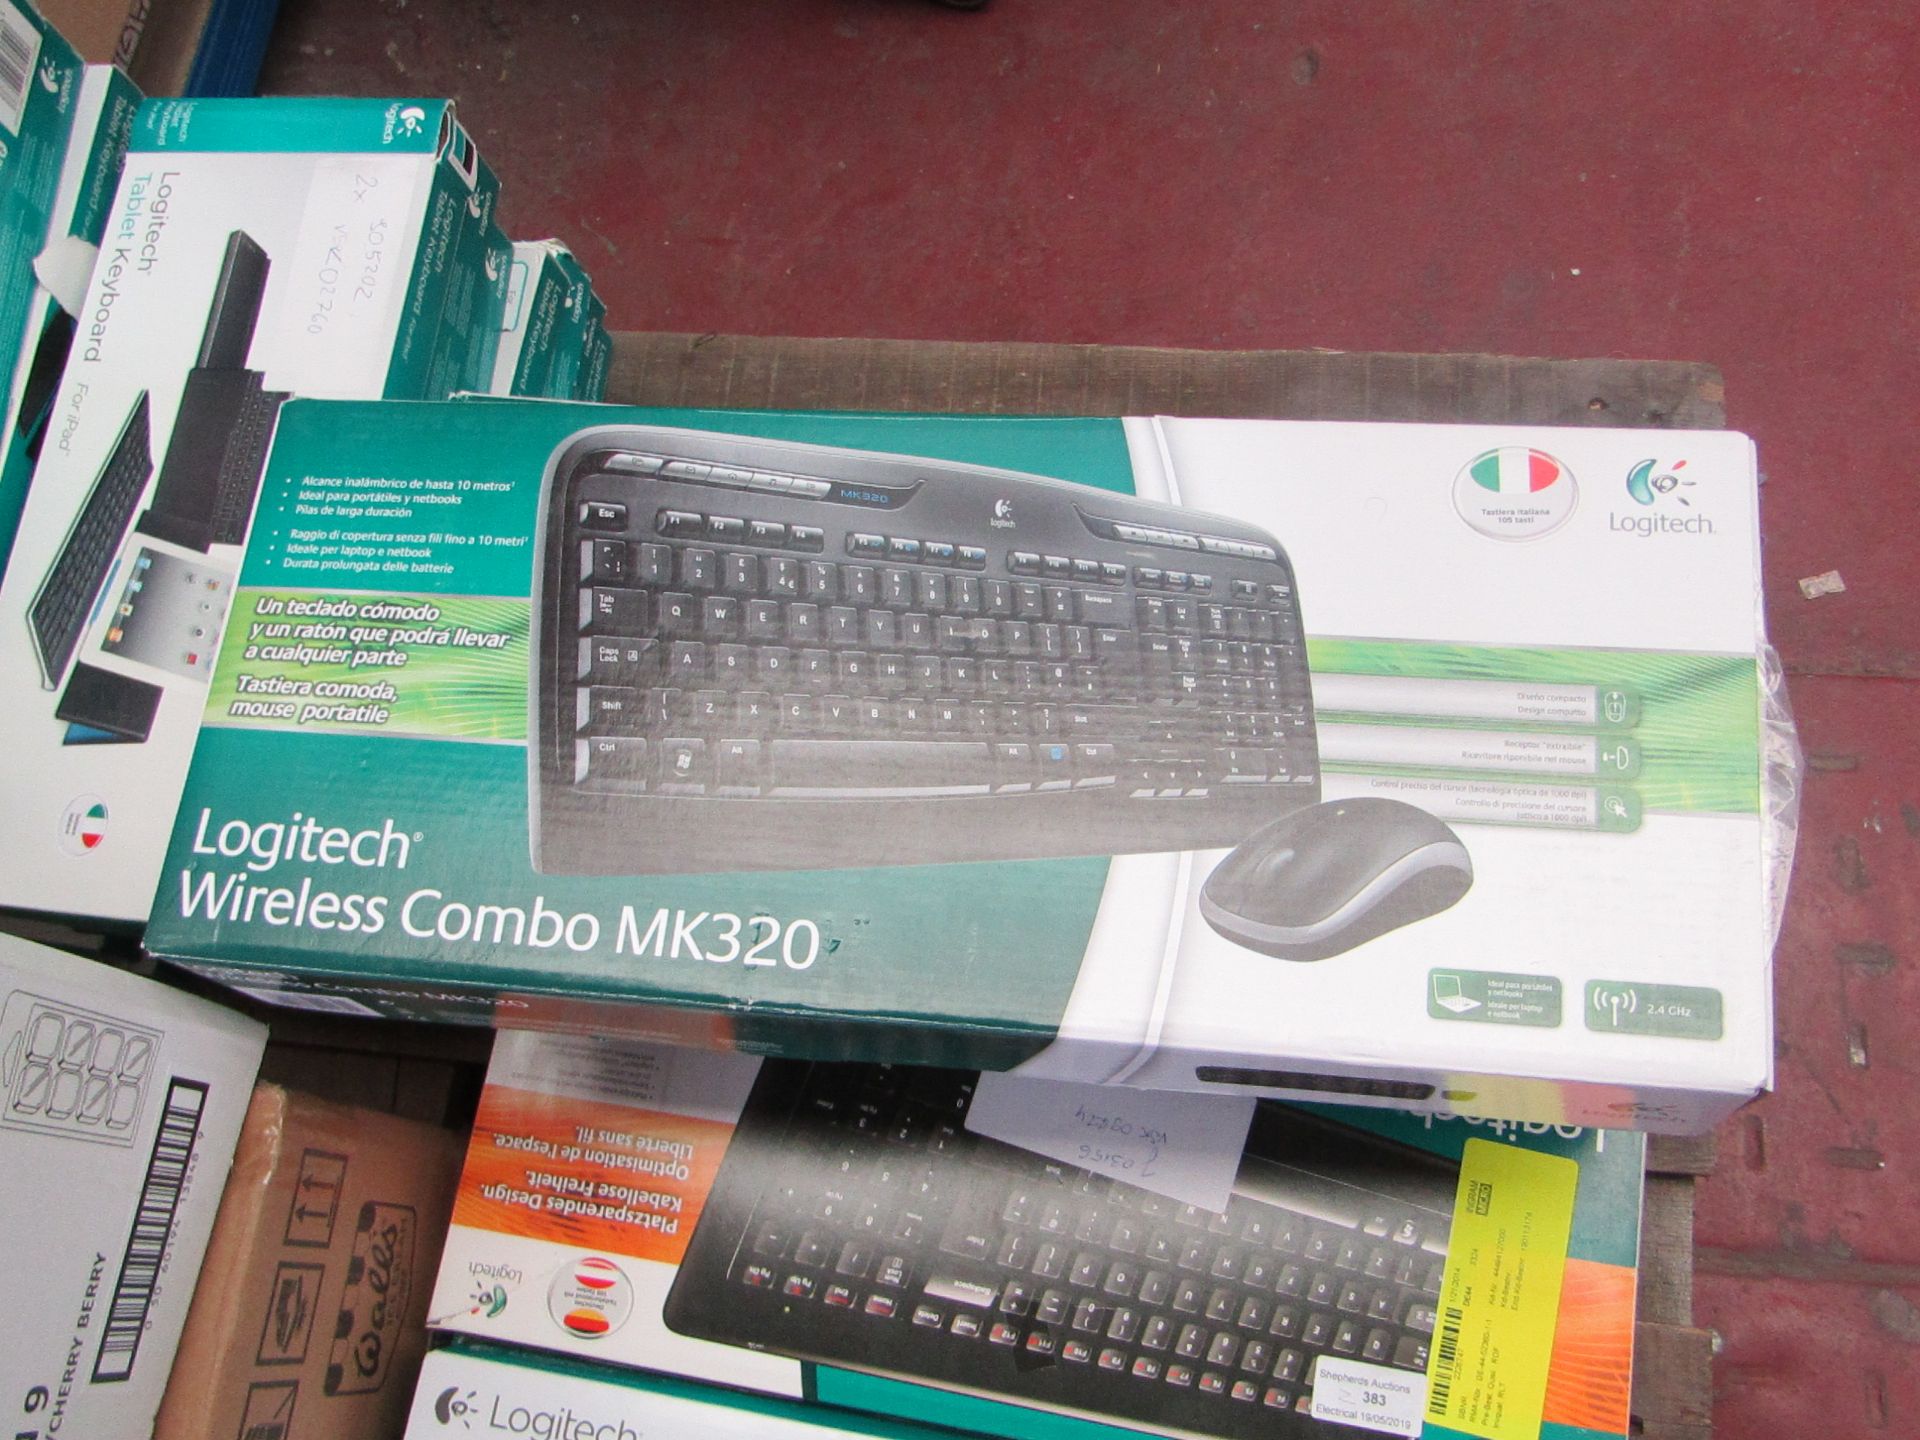 Logitech wireless combo MK320, untested and boxed.